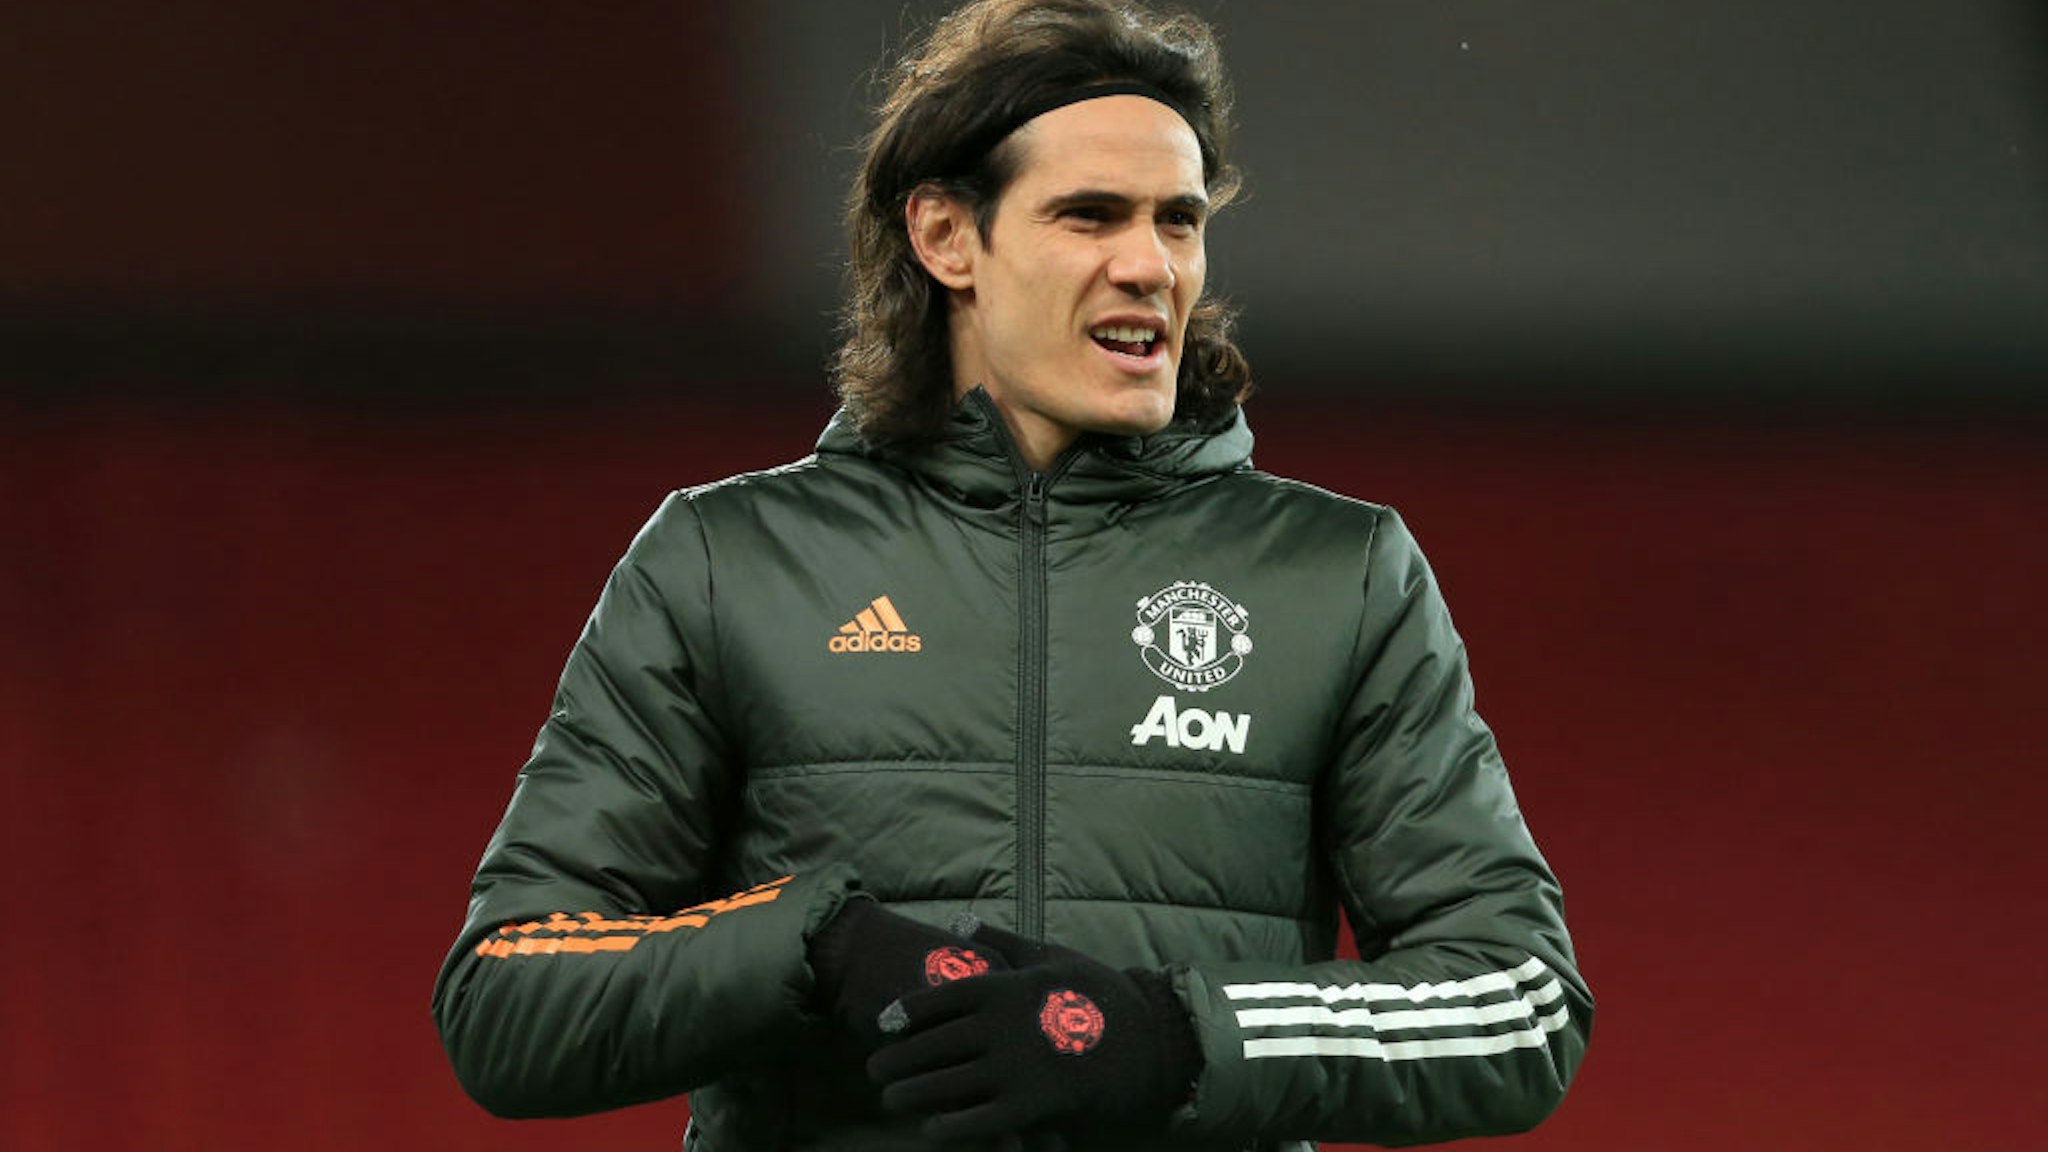 Edinson Cavani of Manchester United looks on before The Emirates FA Cup Fifth Round match between Manchester United and West Ham United at Old Trafford on February 9, 2021 in Manchester, England.